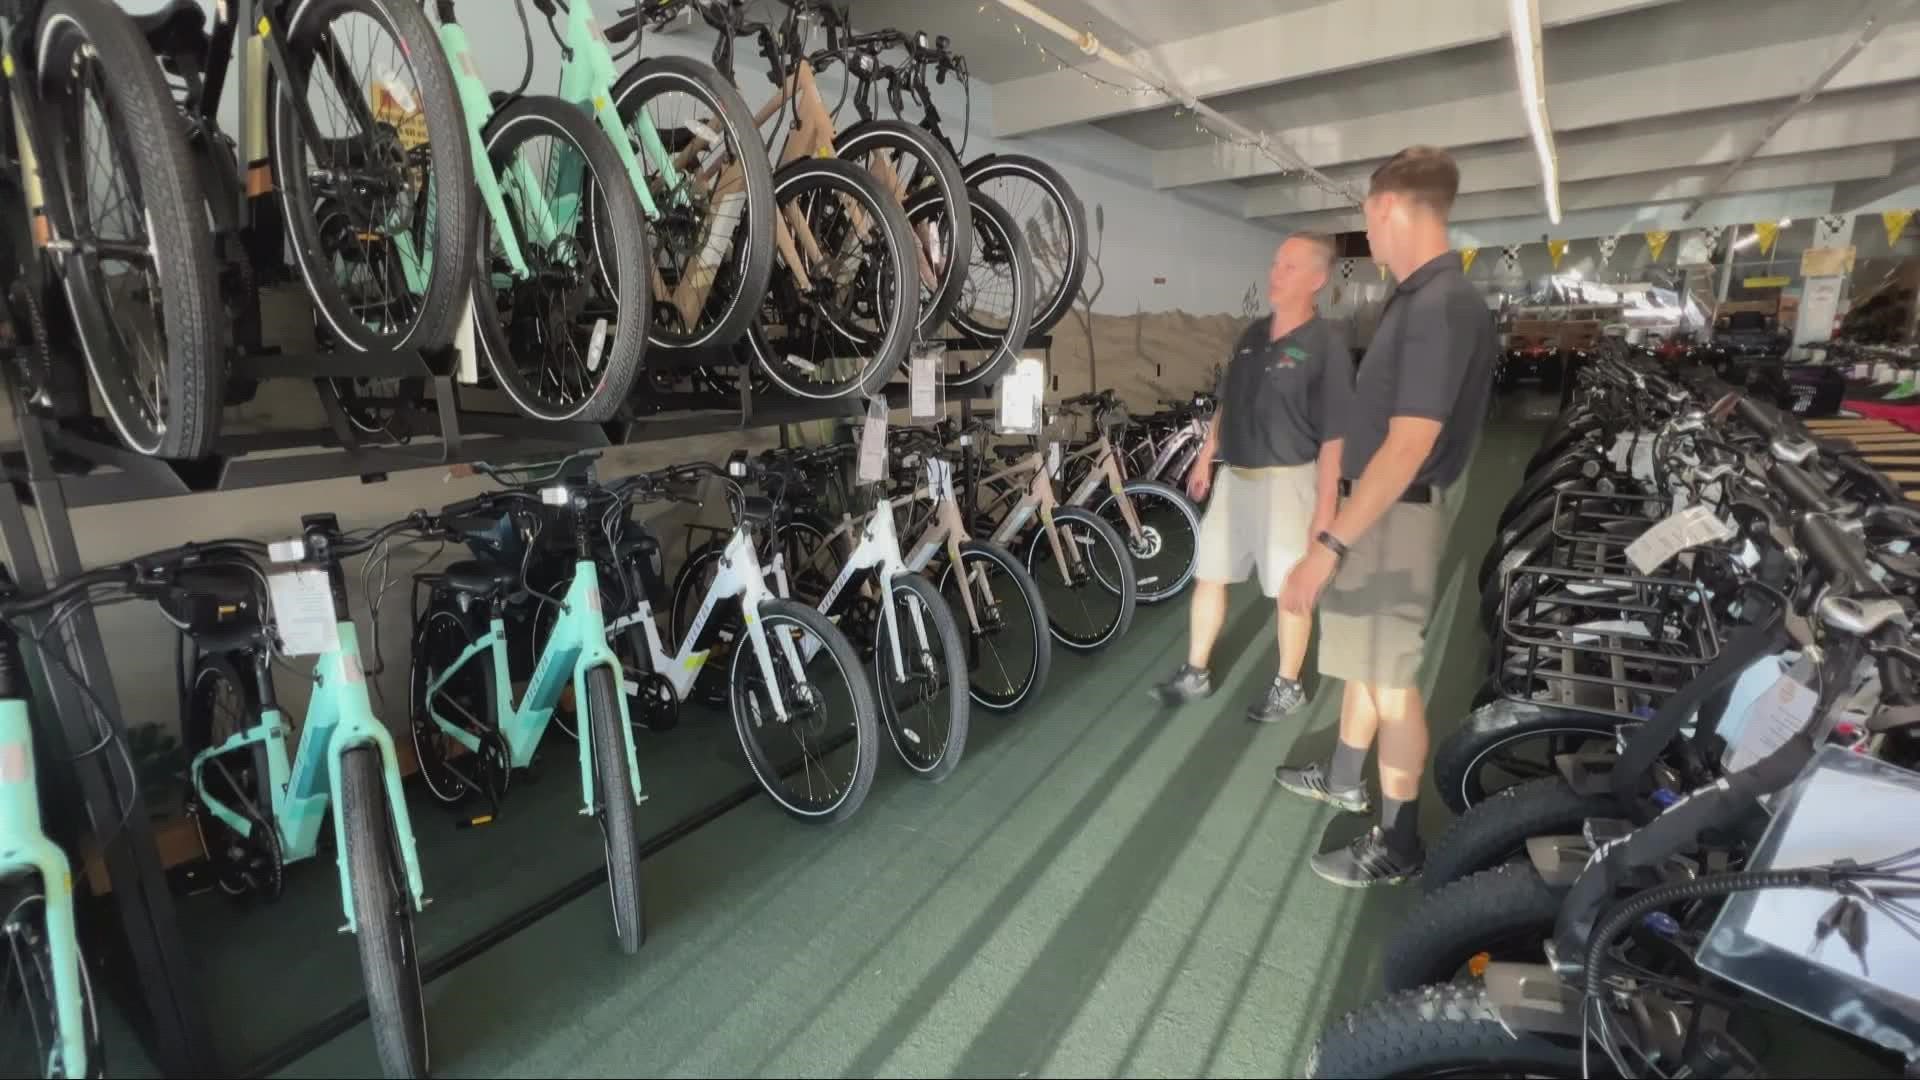 E-Bikes are the largest growing transportation segment in America. Hear from Sacramento's largest e-bike distributor why they're so popular.